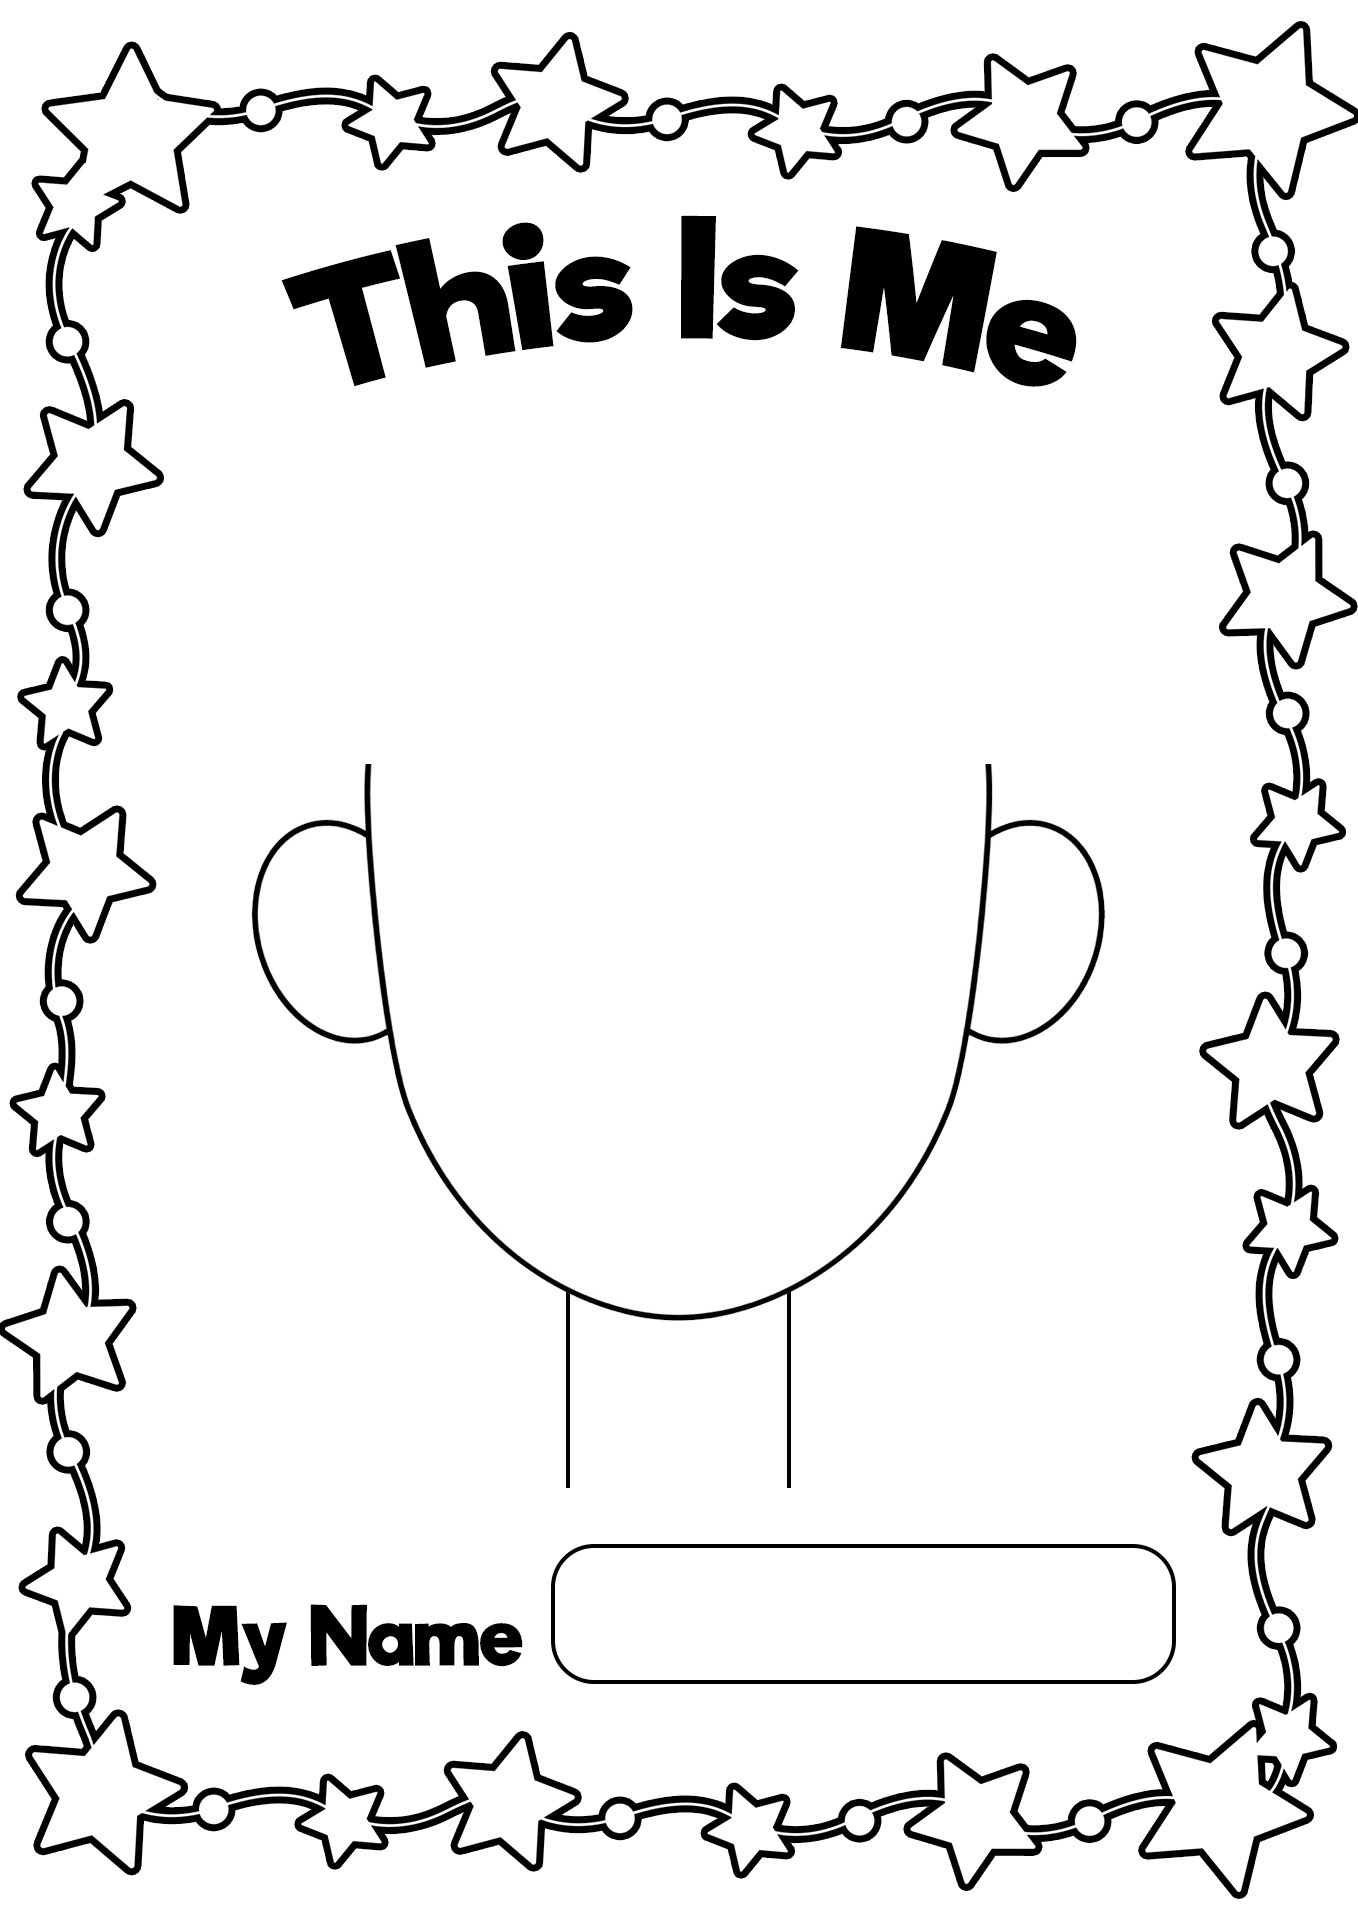 14-self-portrait-first-day-of-school-worksheets-free-pdf-at